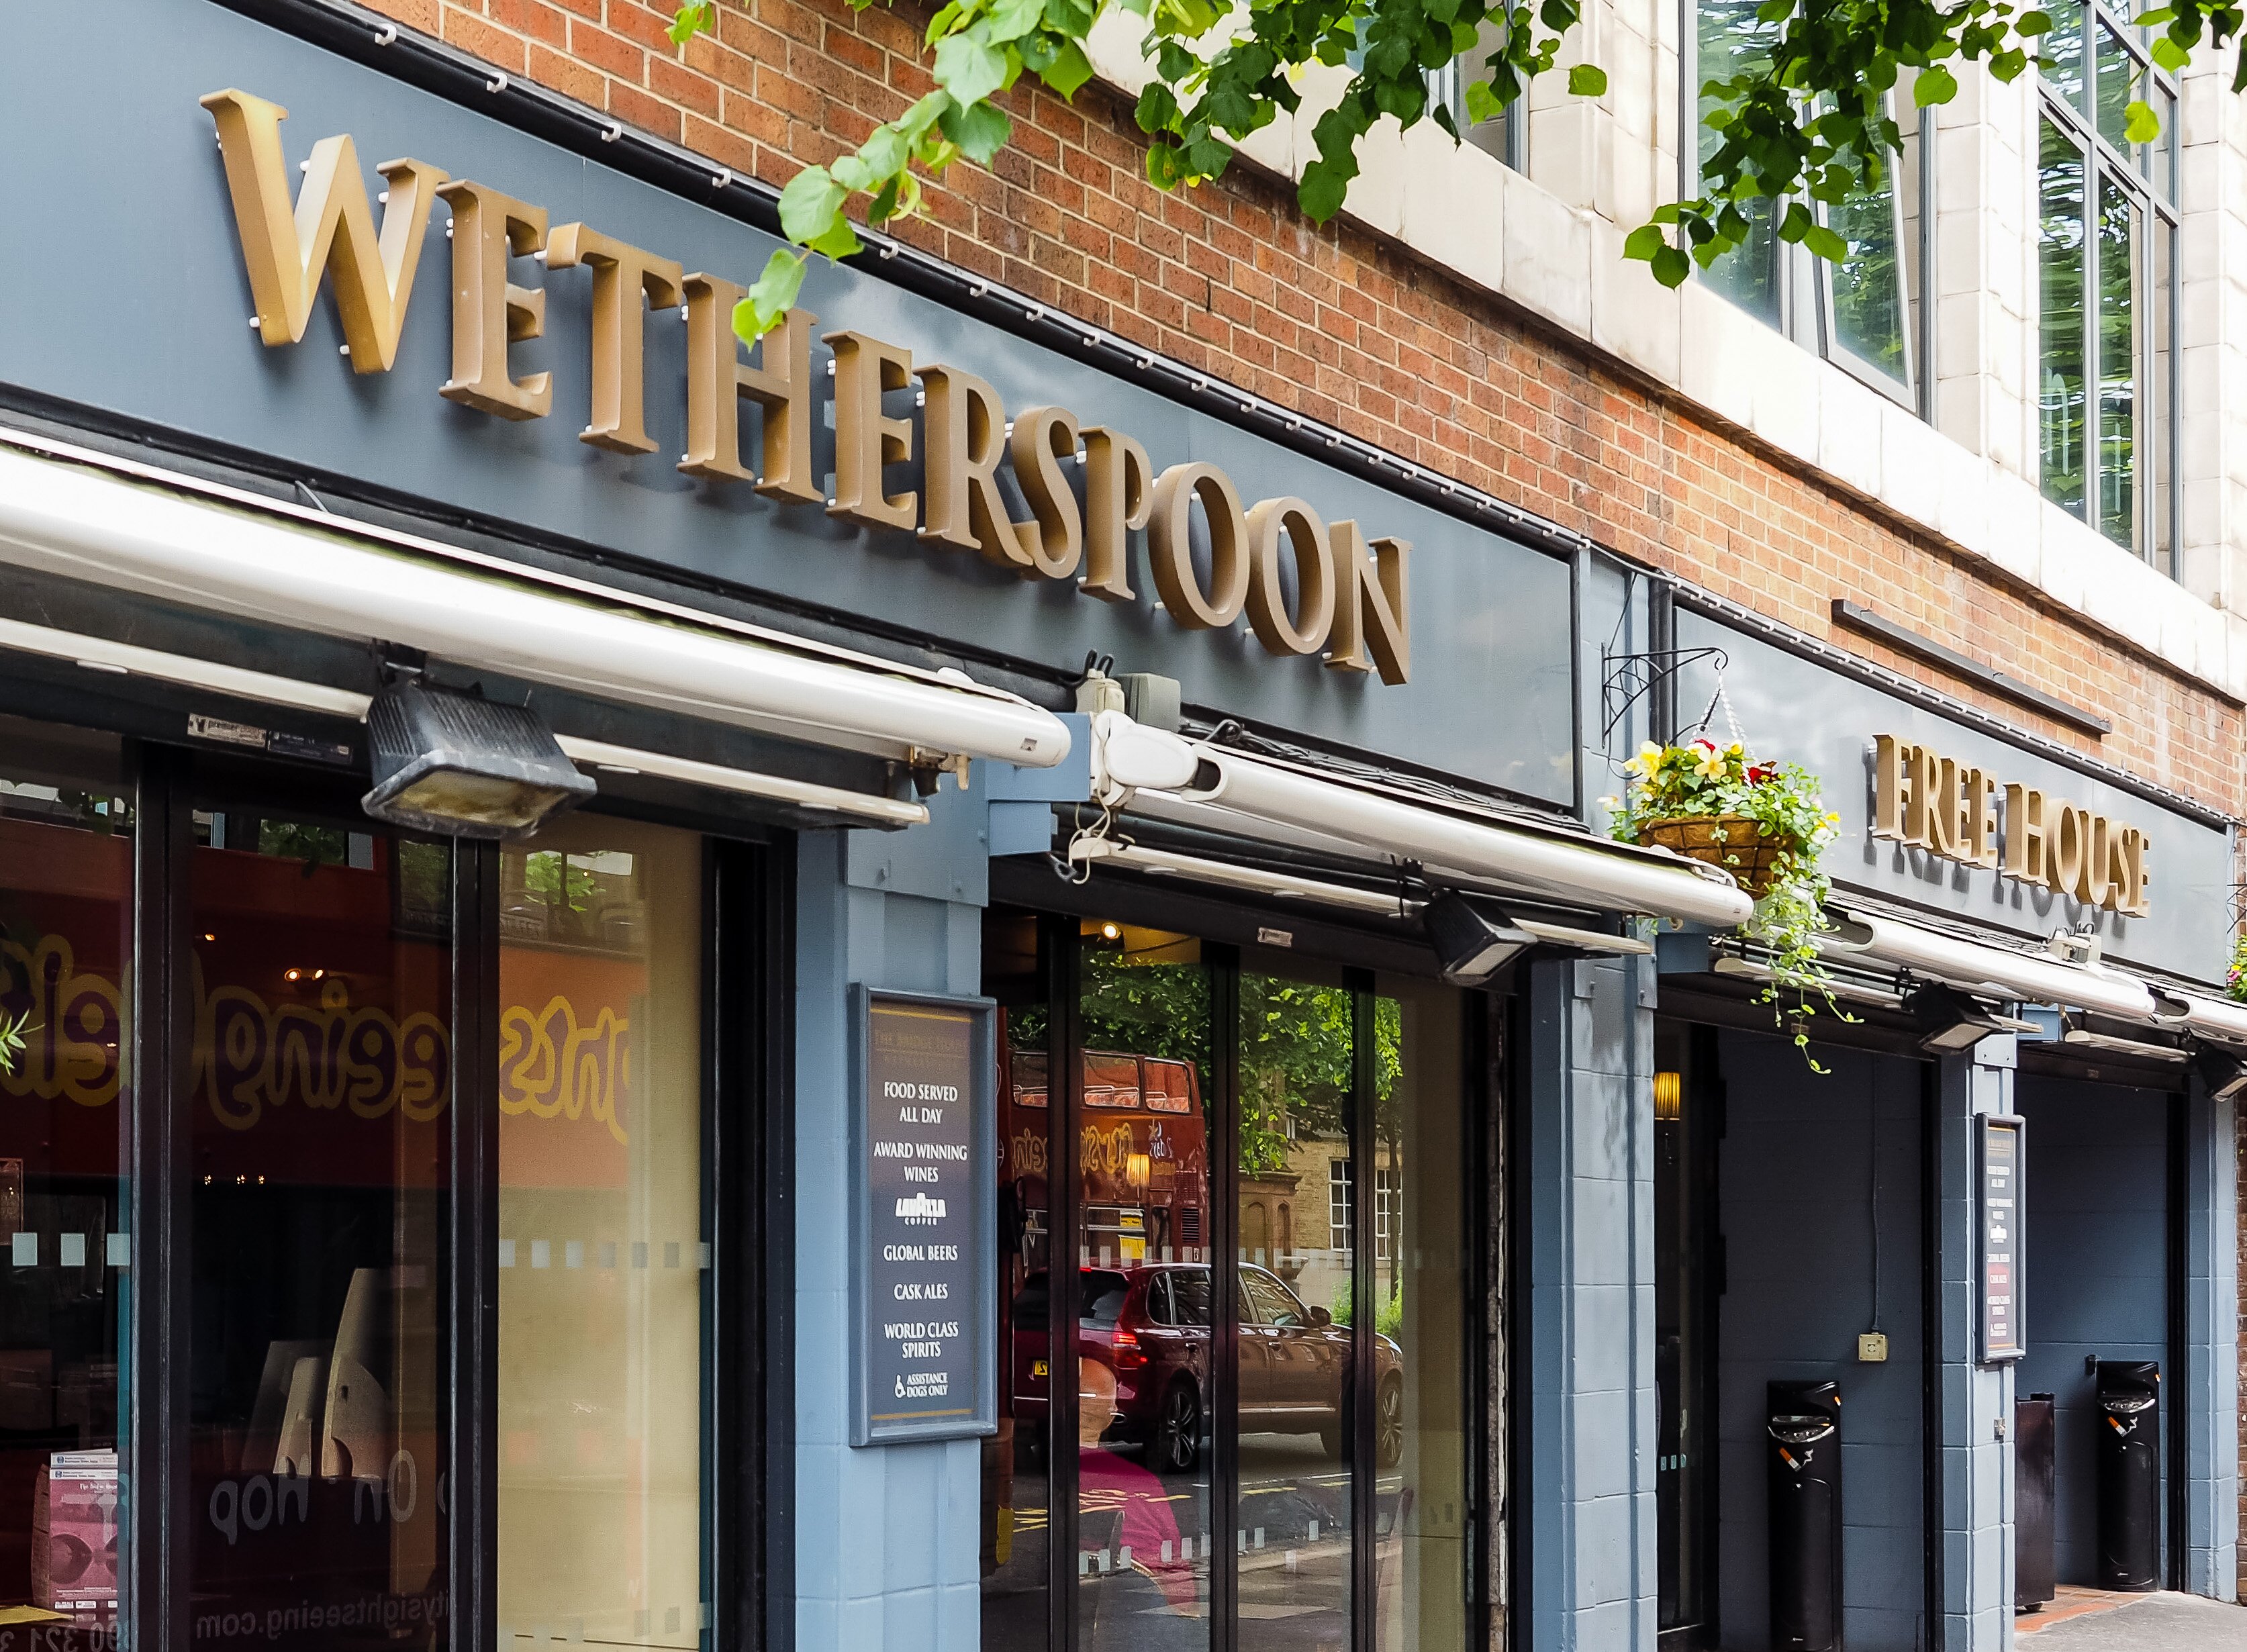 Wetherspoons returns to profit as like-for-like sales increase by 13%